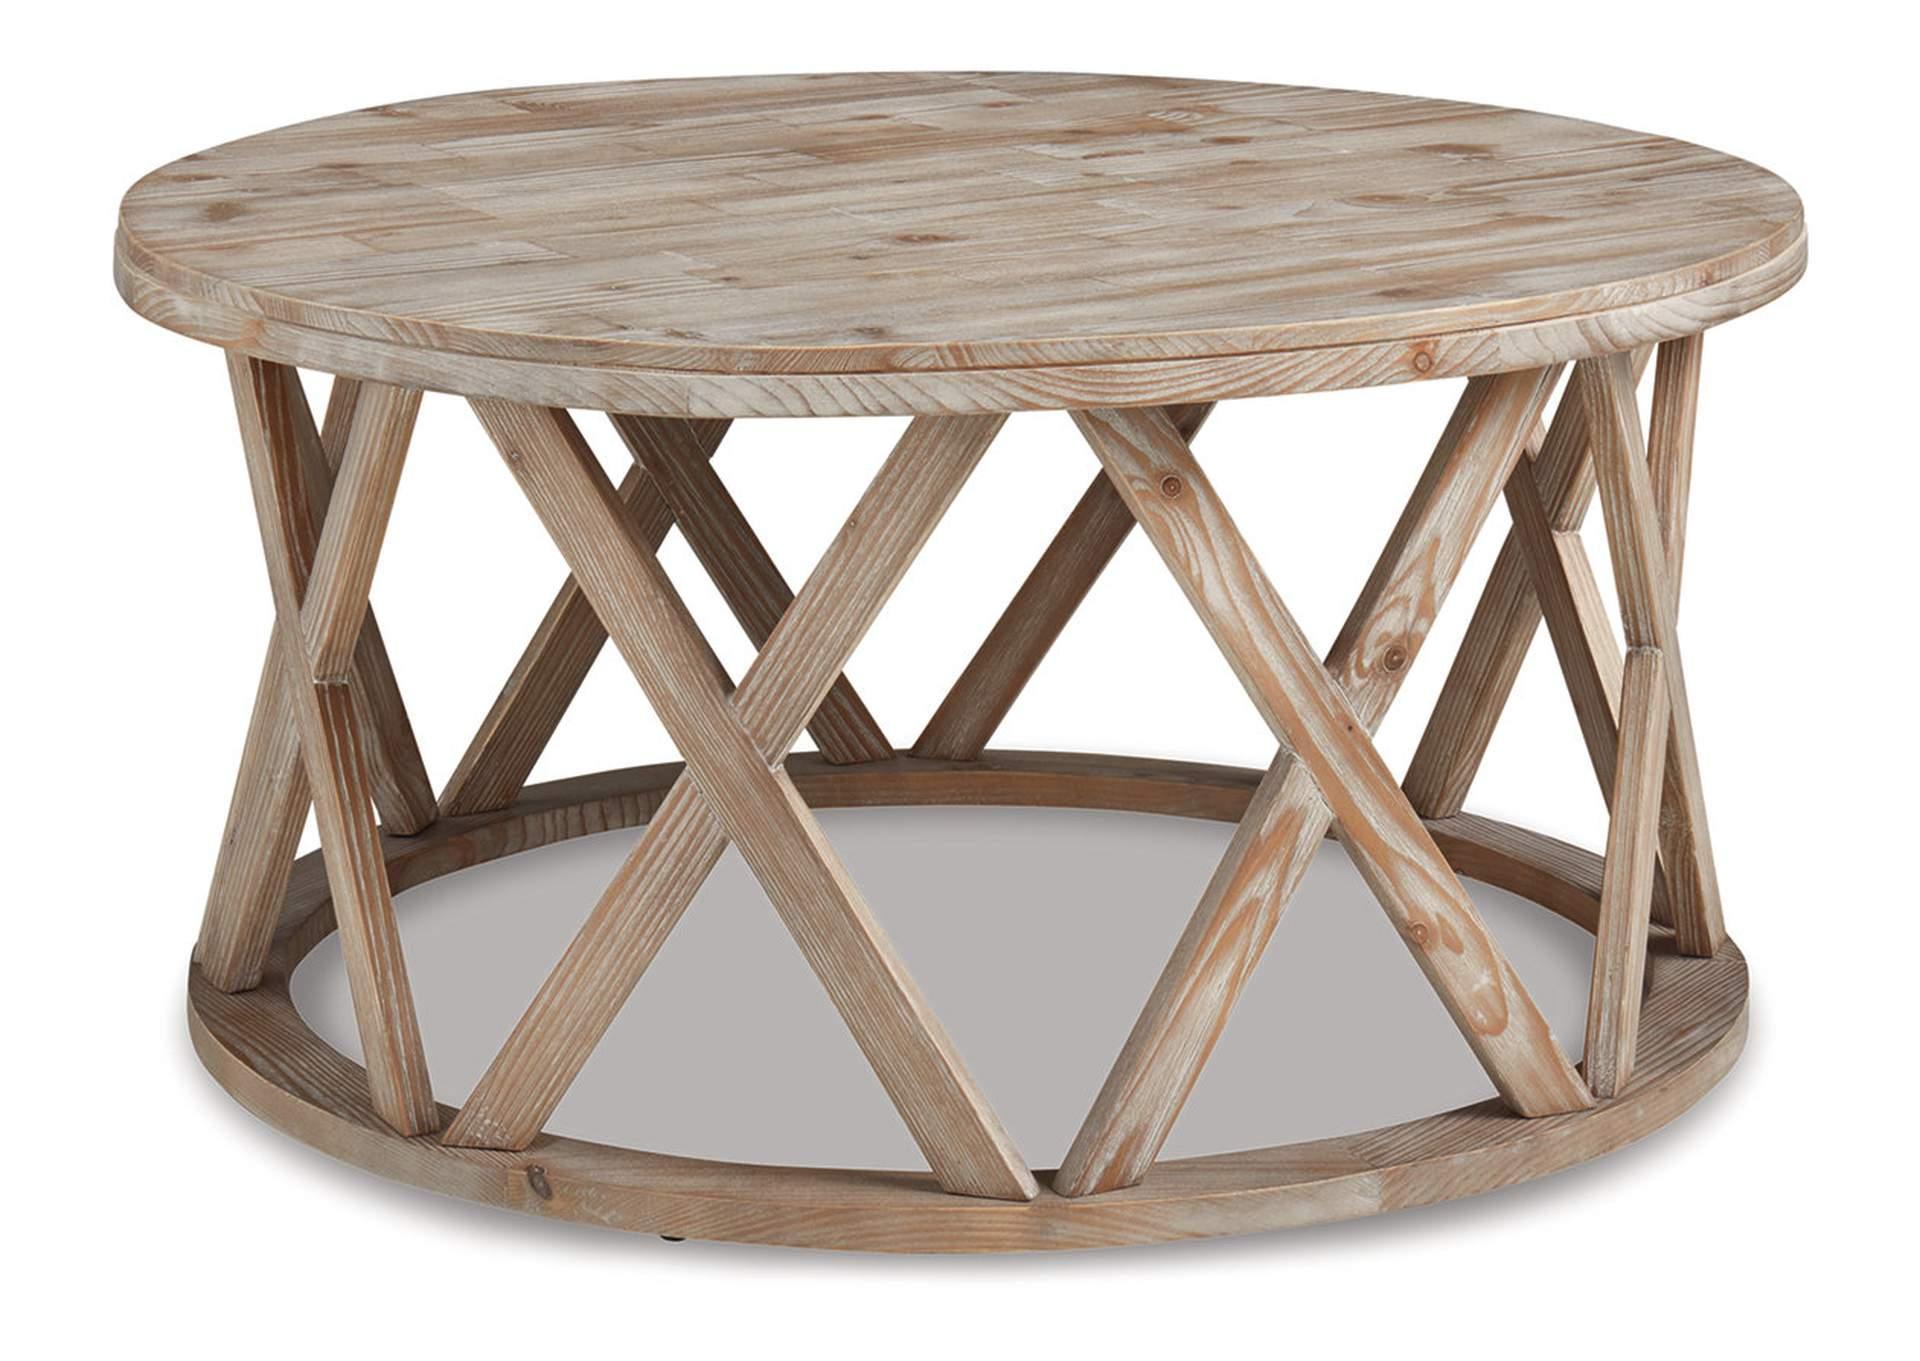 Glasslore Coffee Table,In Store